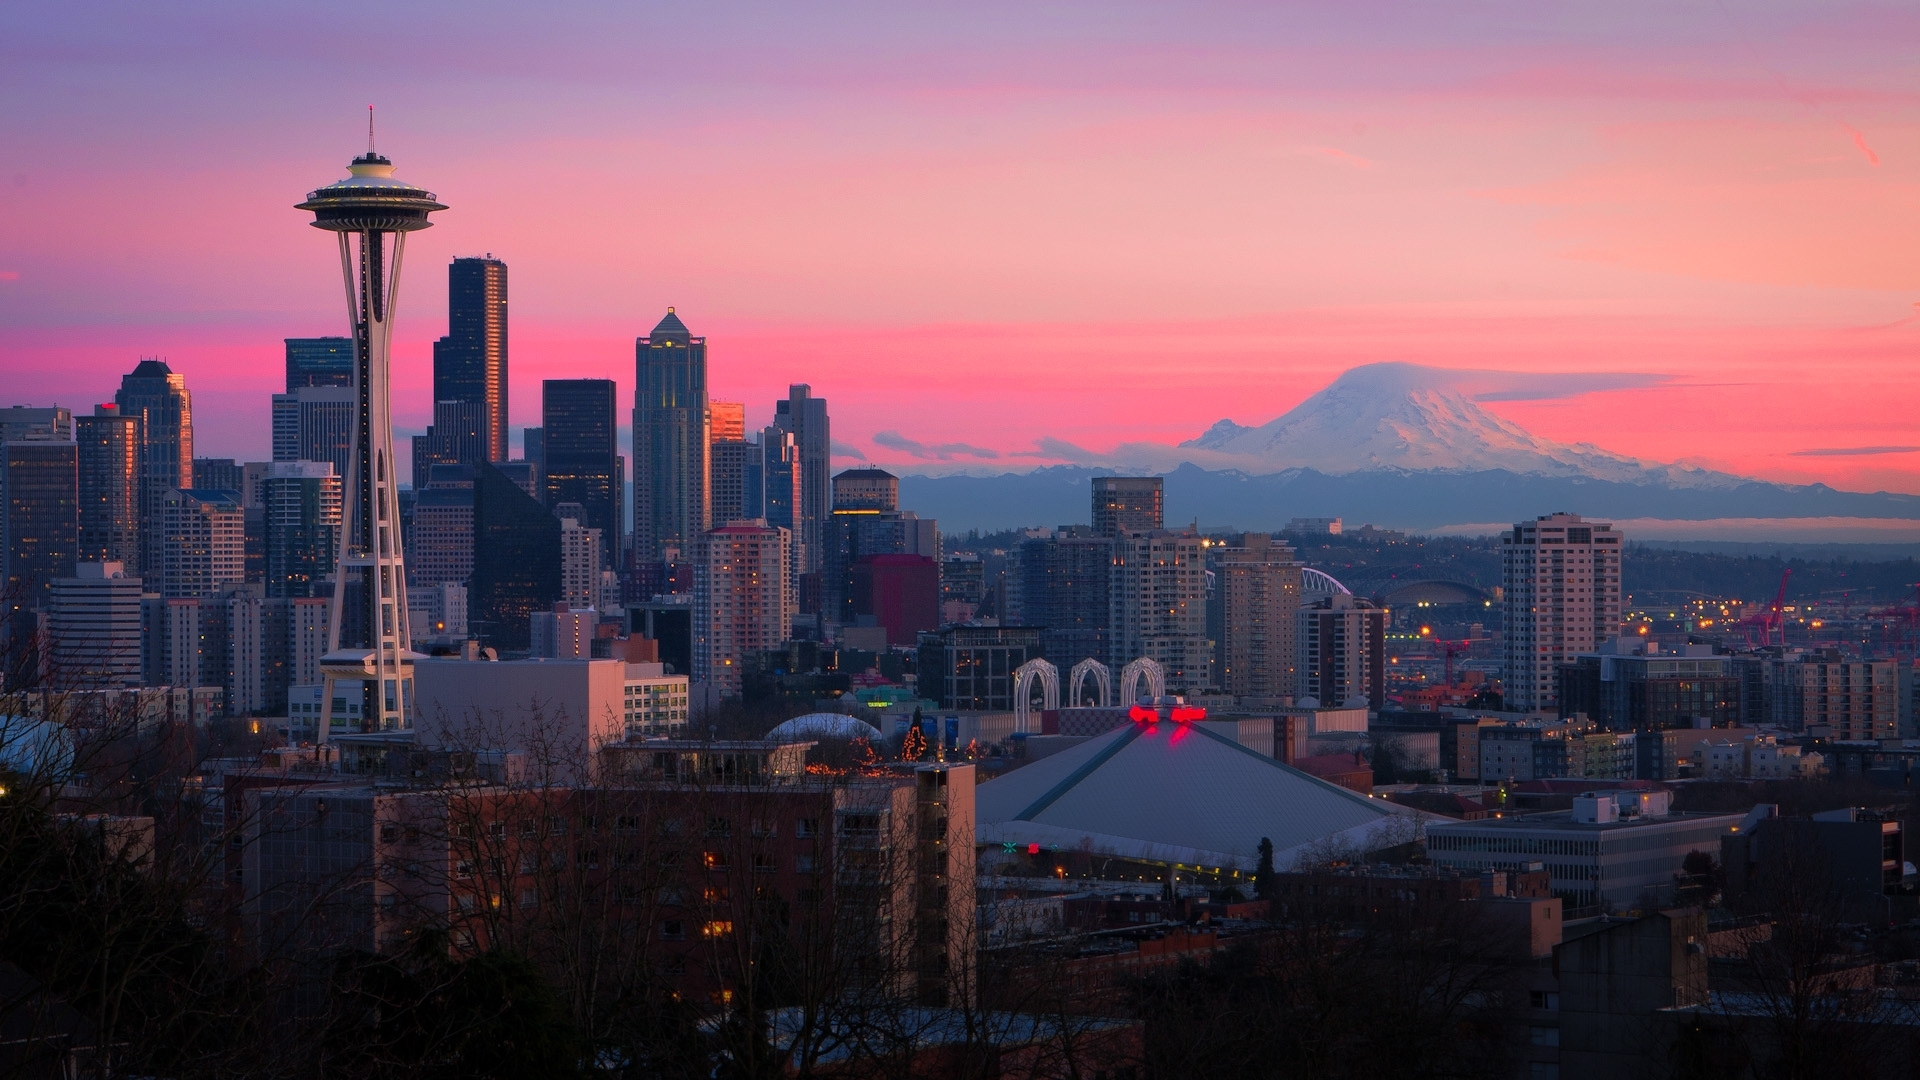 seattle wallpapers high resolution | seattle wallpapers, backgrounds